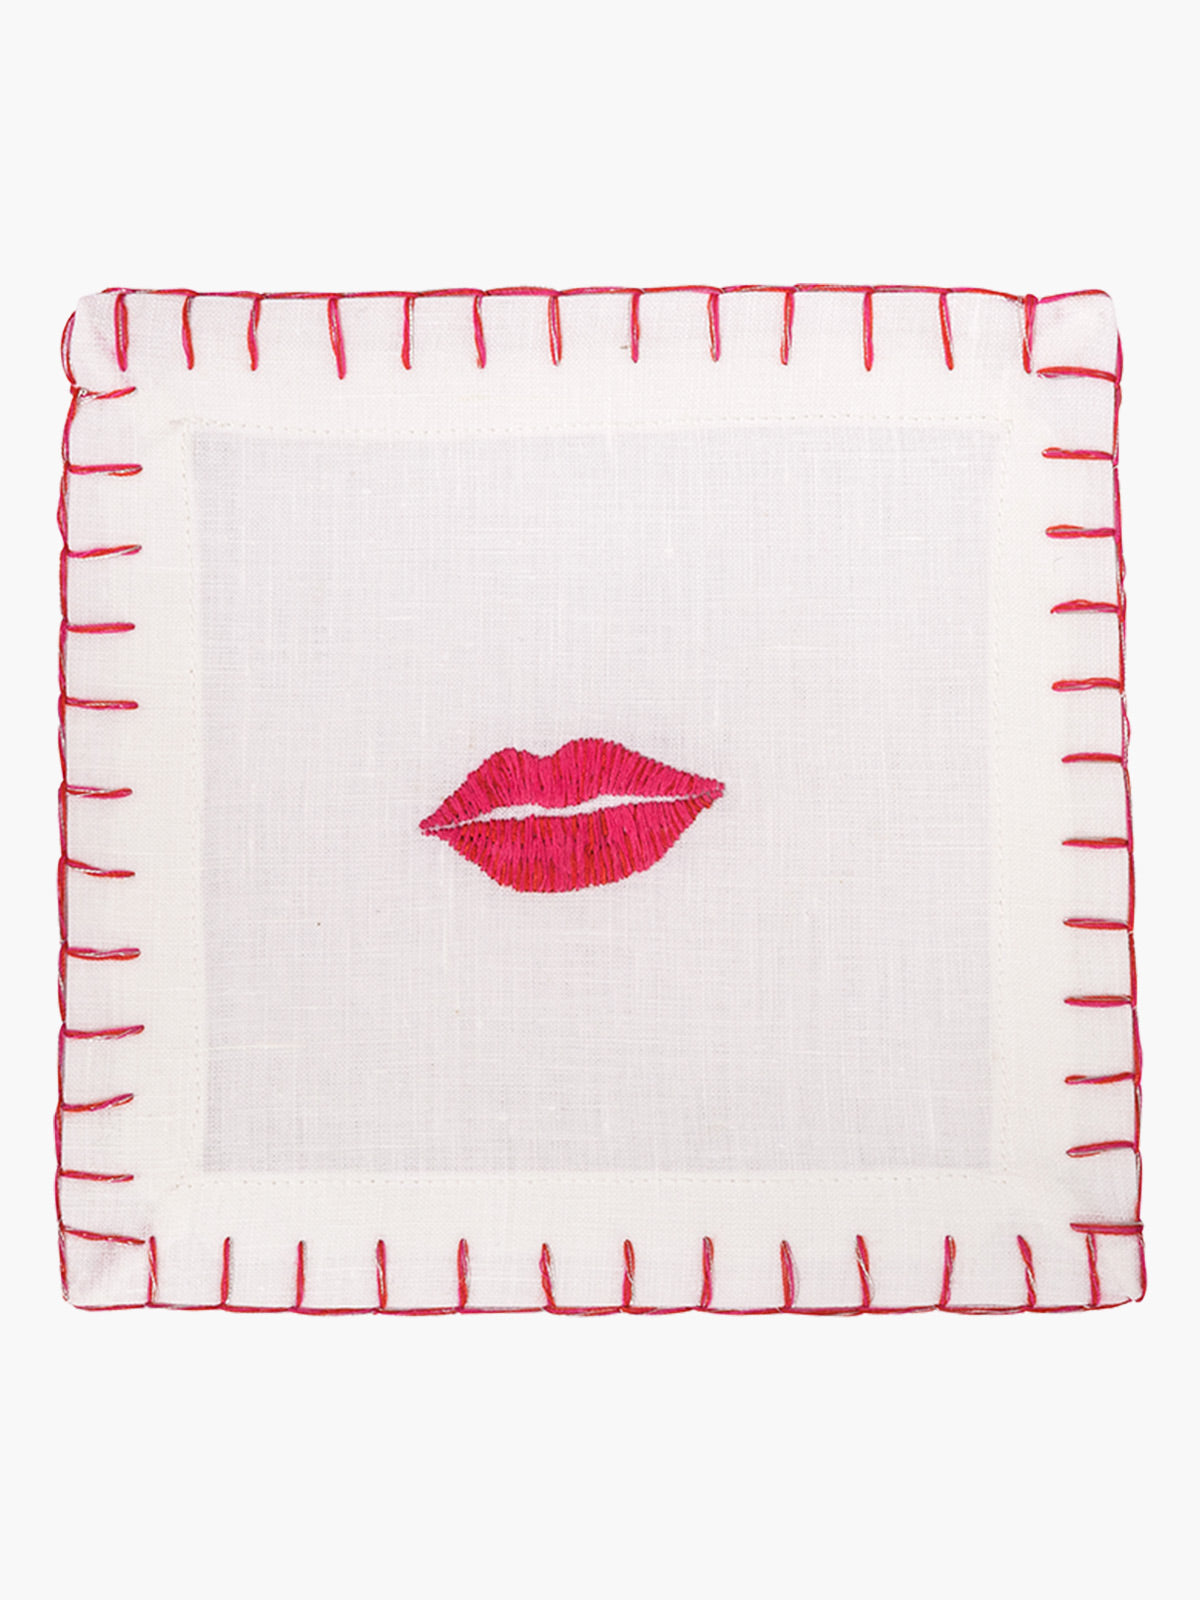 Cocktail Napkin Set of 4 | Beso Cocktail Napkin Set of 4 | Beso